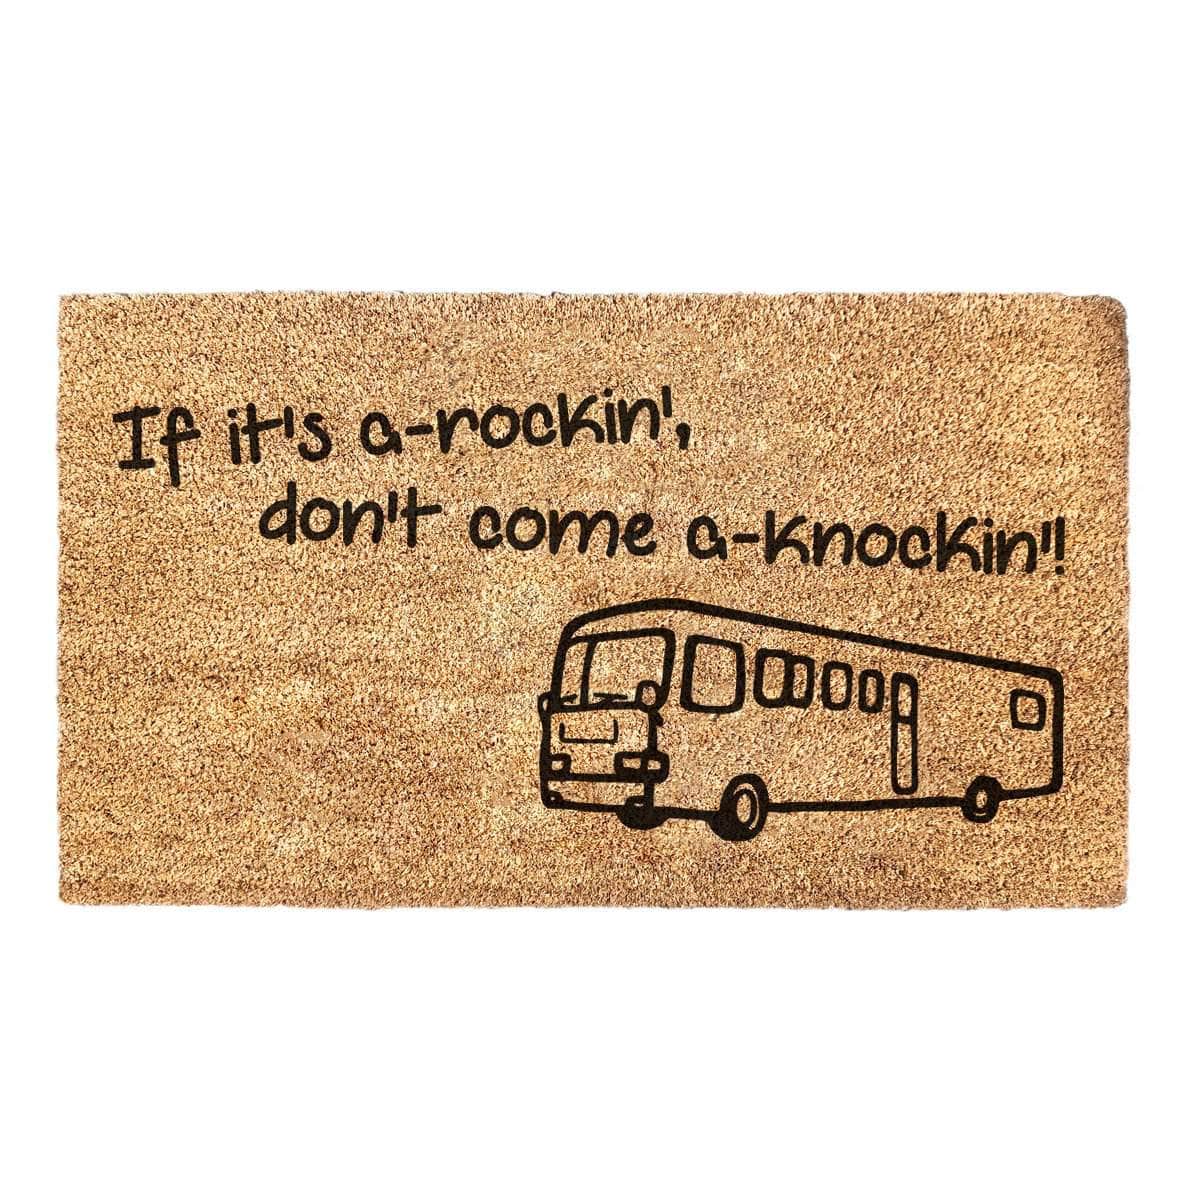 If it's a-rockin' don't come a'knockin! - Doormat